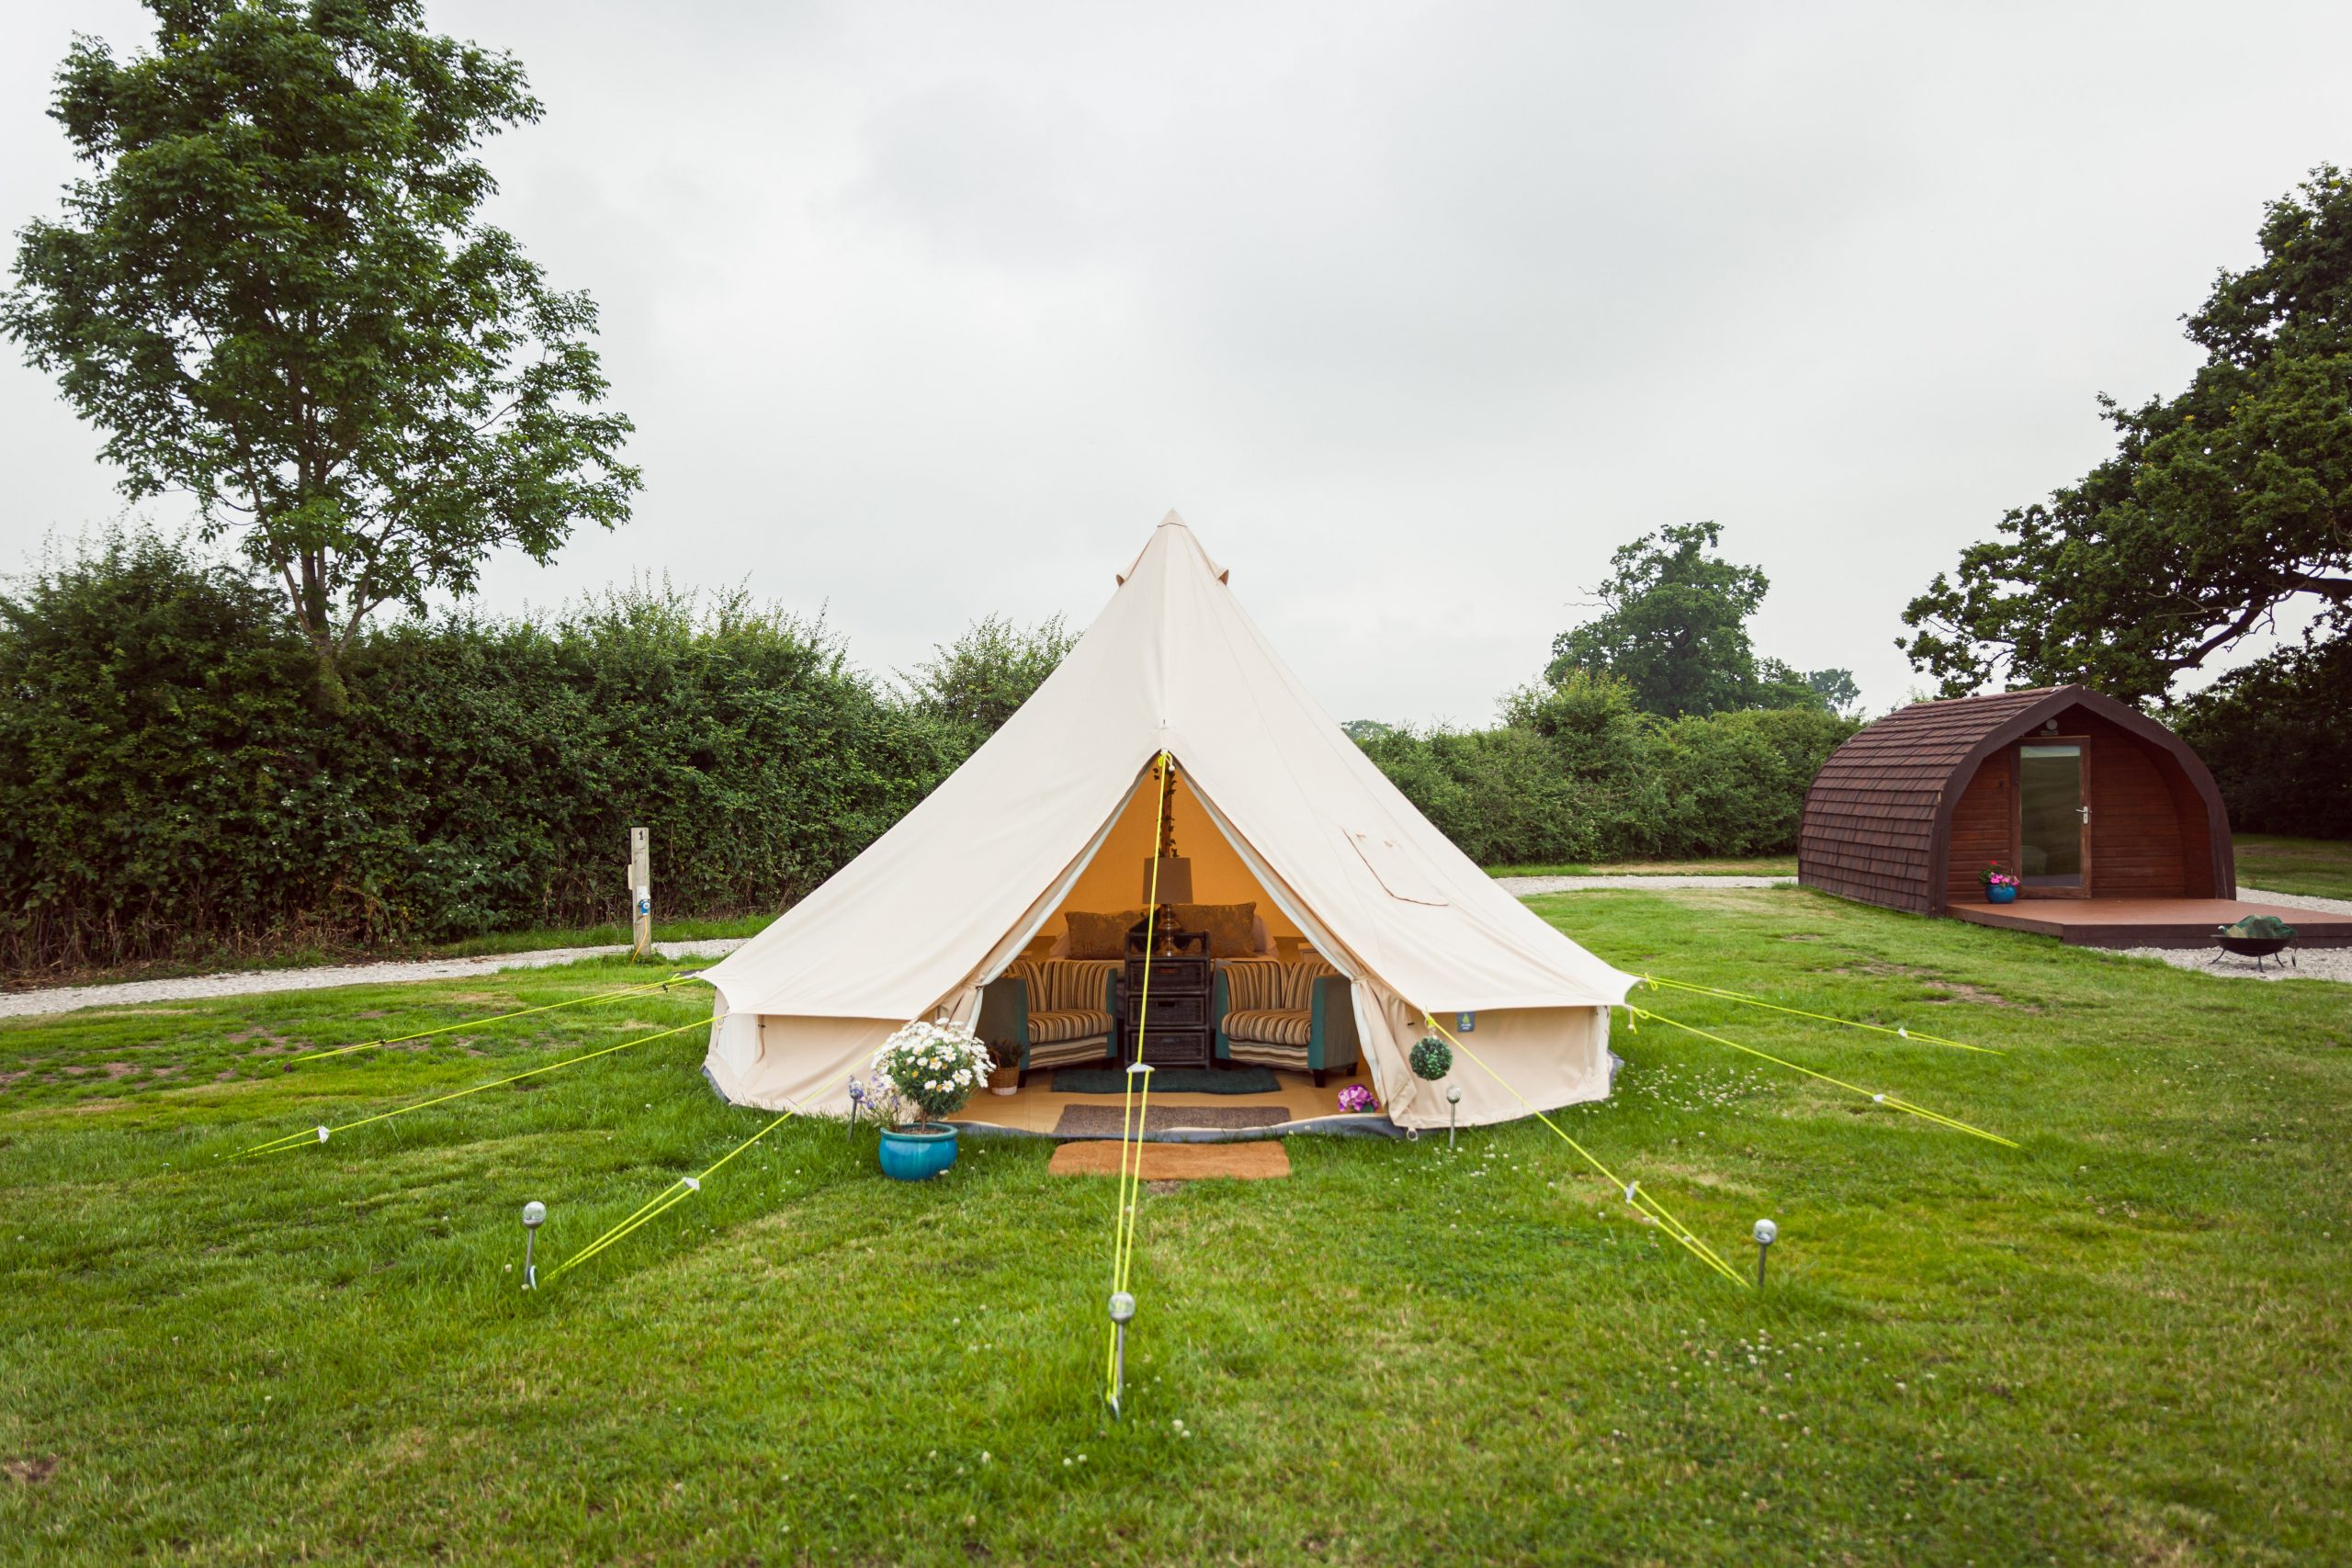 Pitch and Canvas | Glamping and Camping in Cheshire | Glamping tent